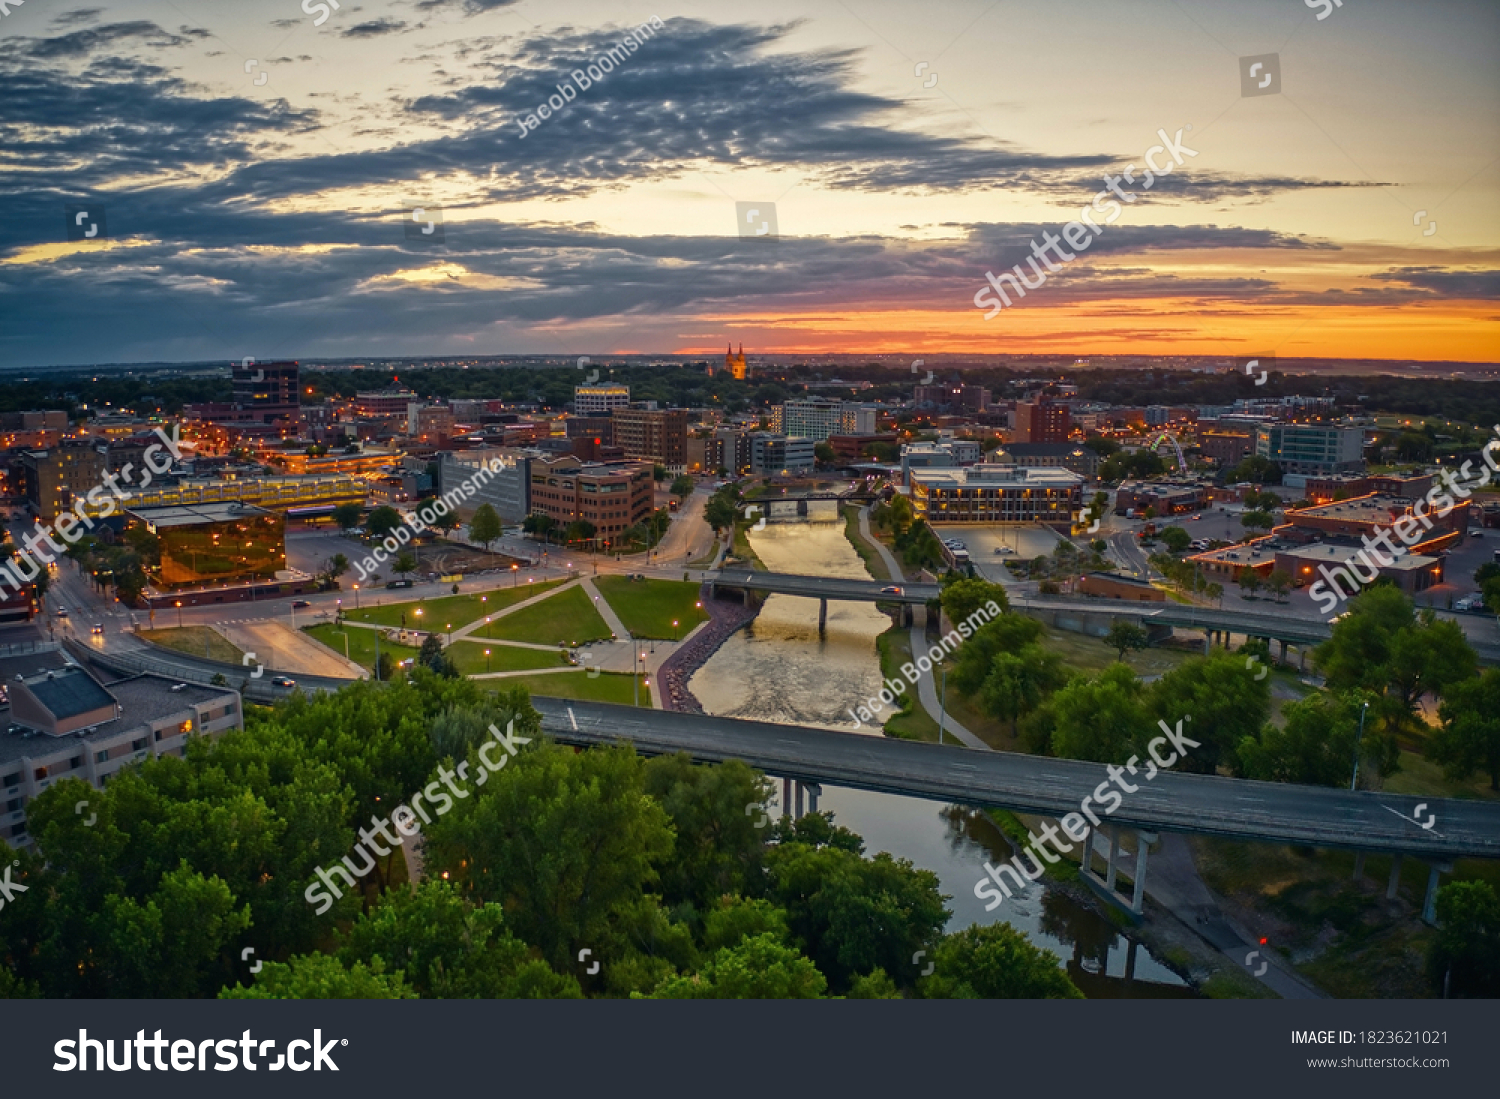 Aerial View of Sioux Falls, South Dakota at Sunset #1823621021